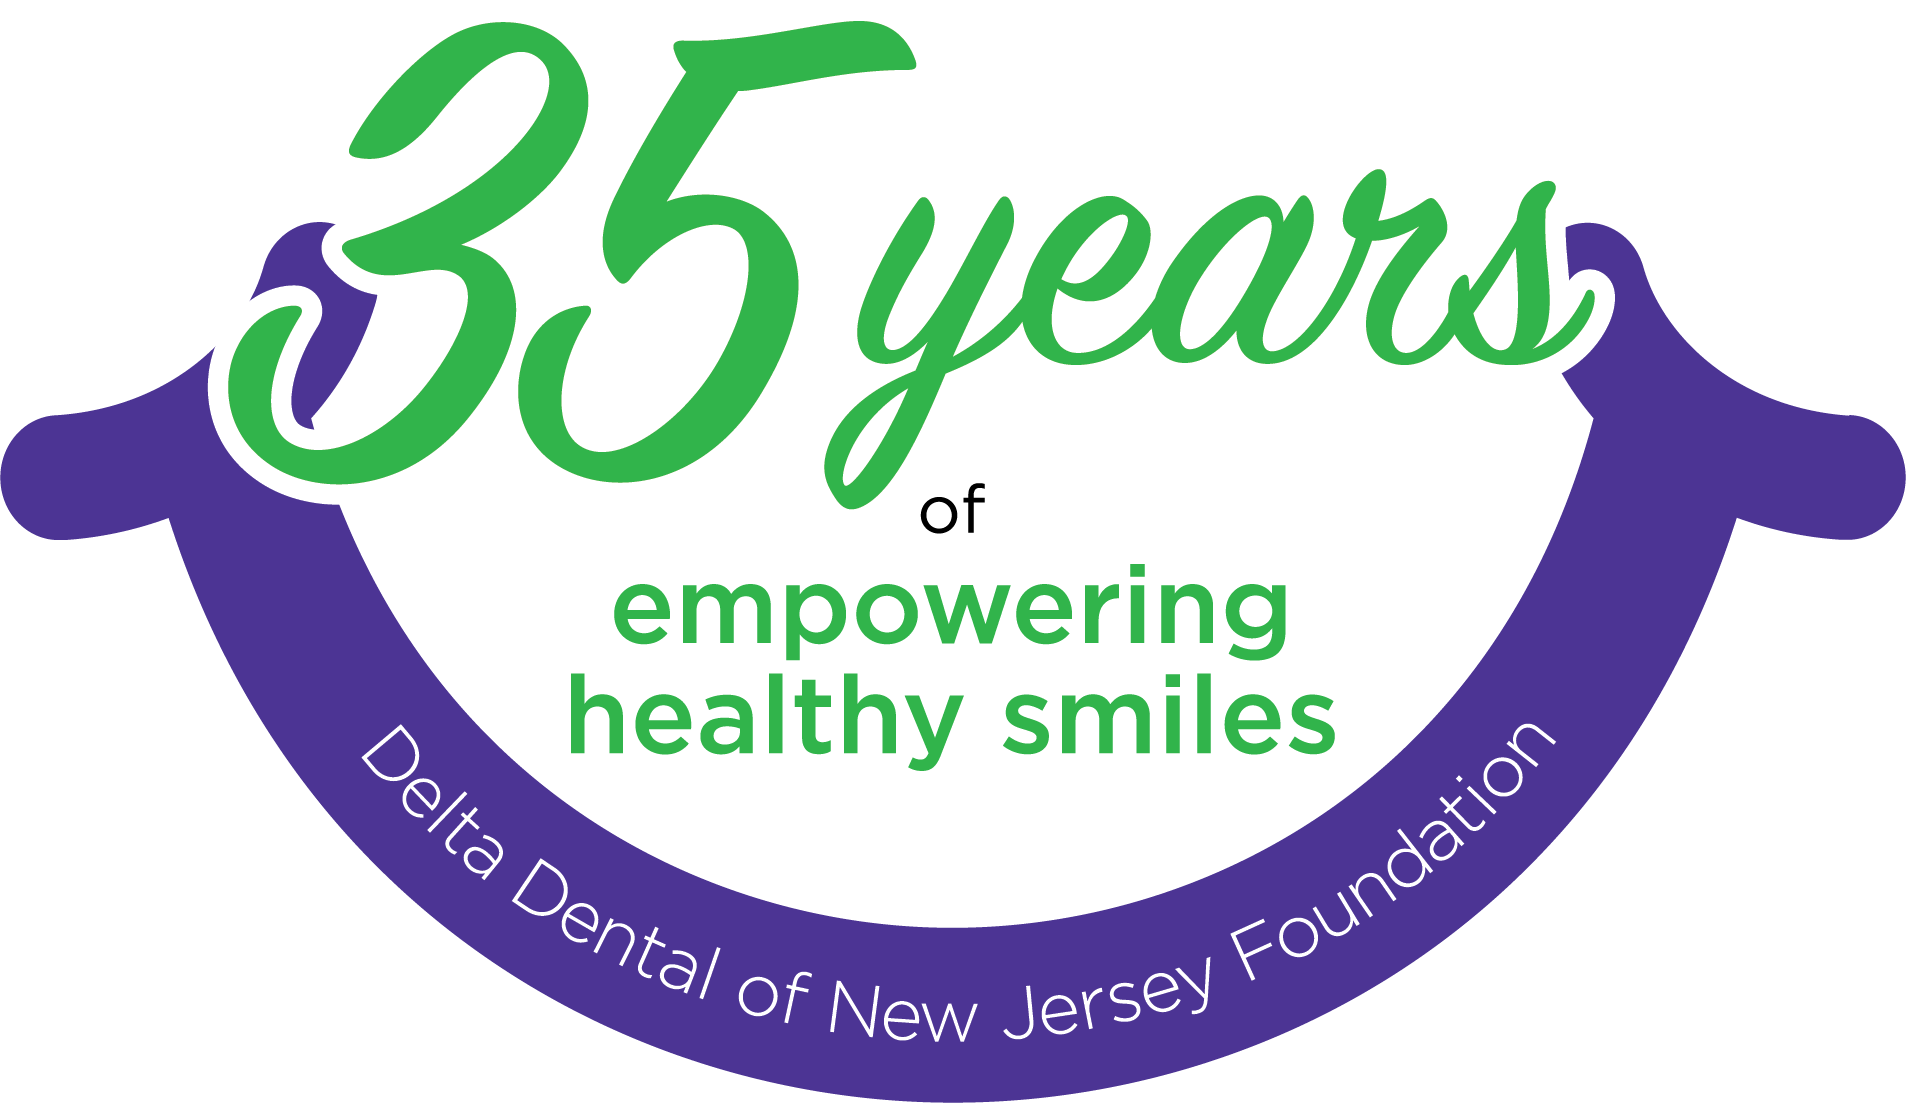 DDNJ Foundation 35 years of empowering healthy smiles 